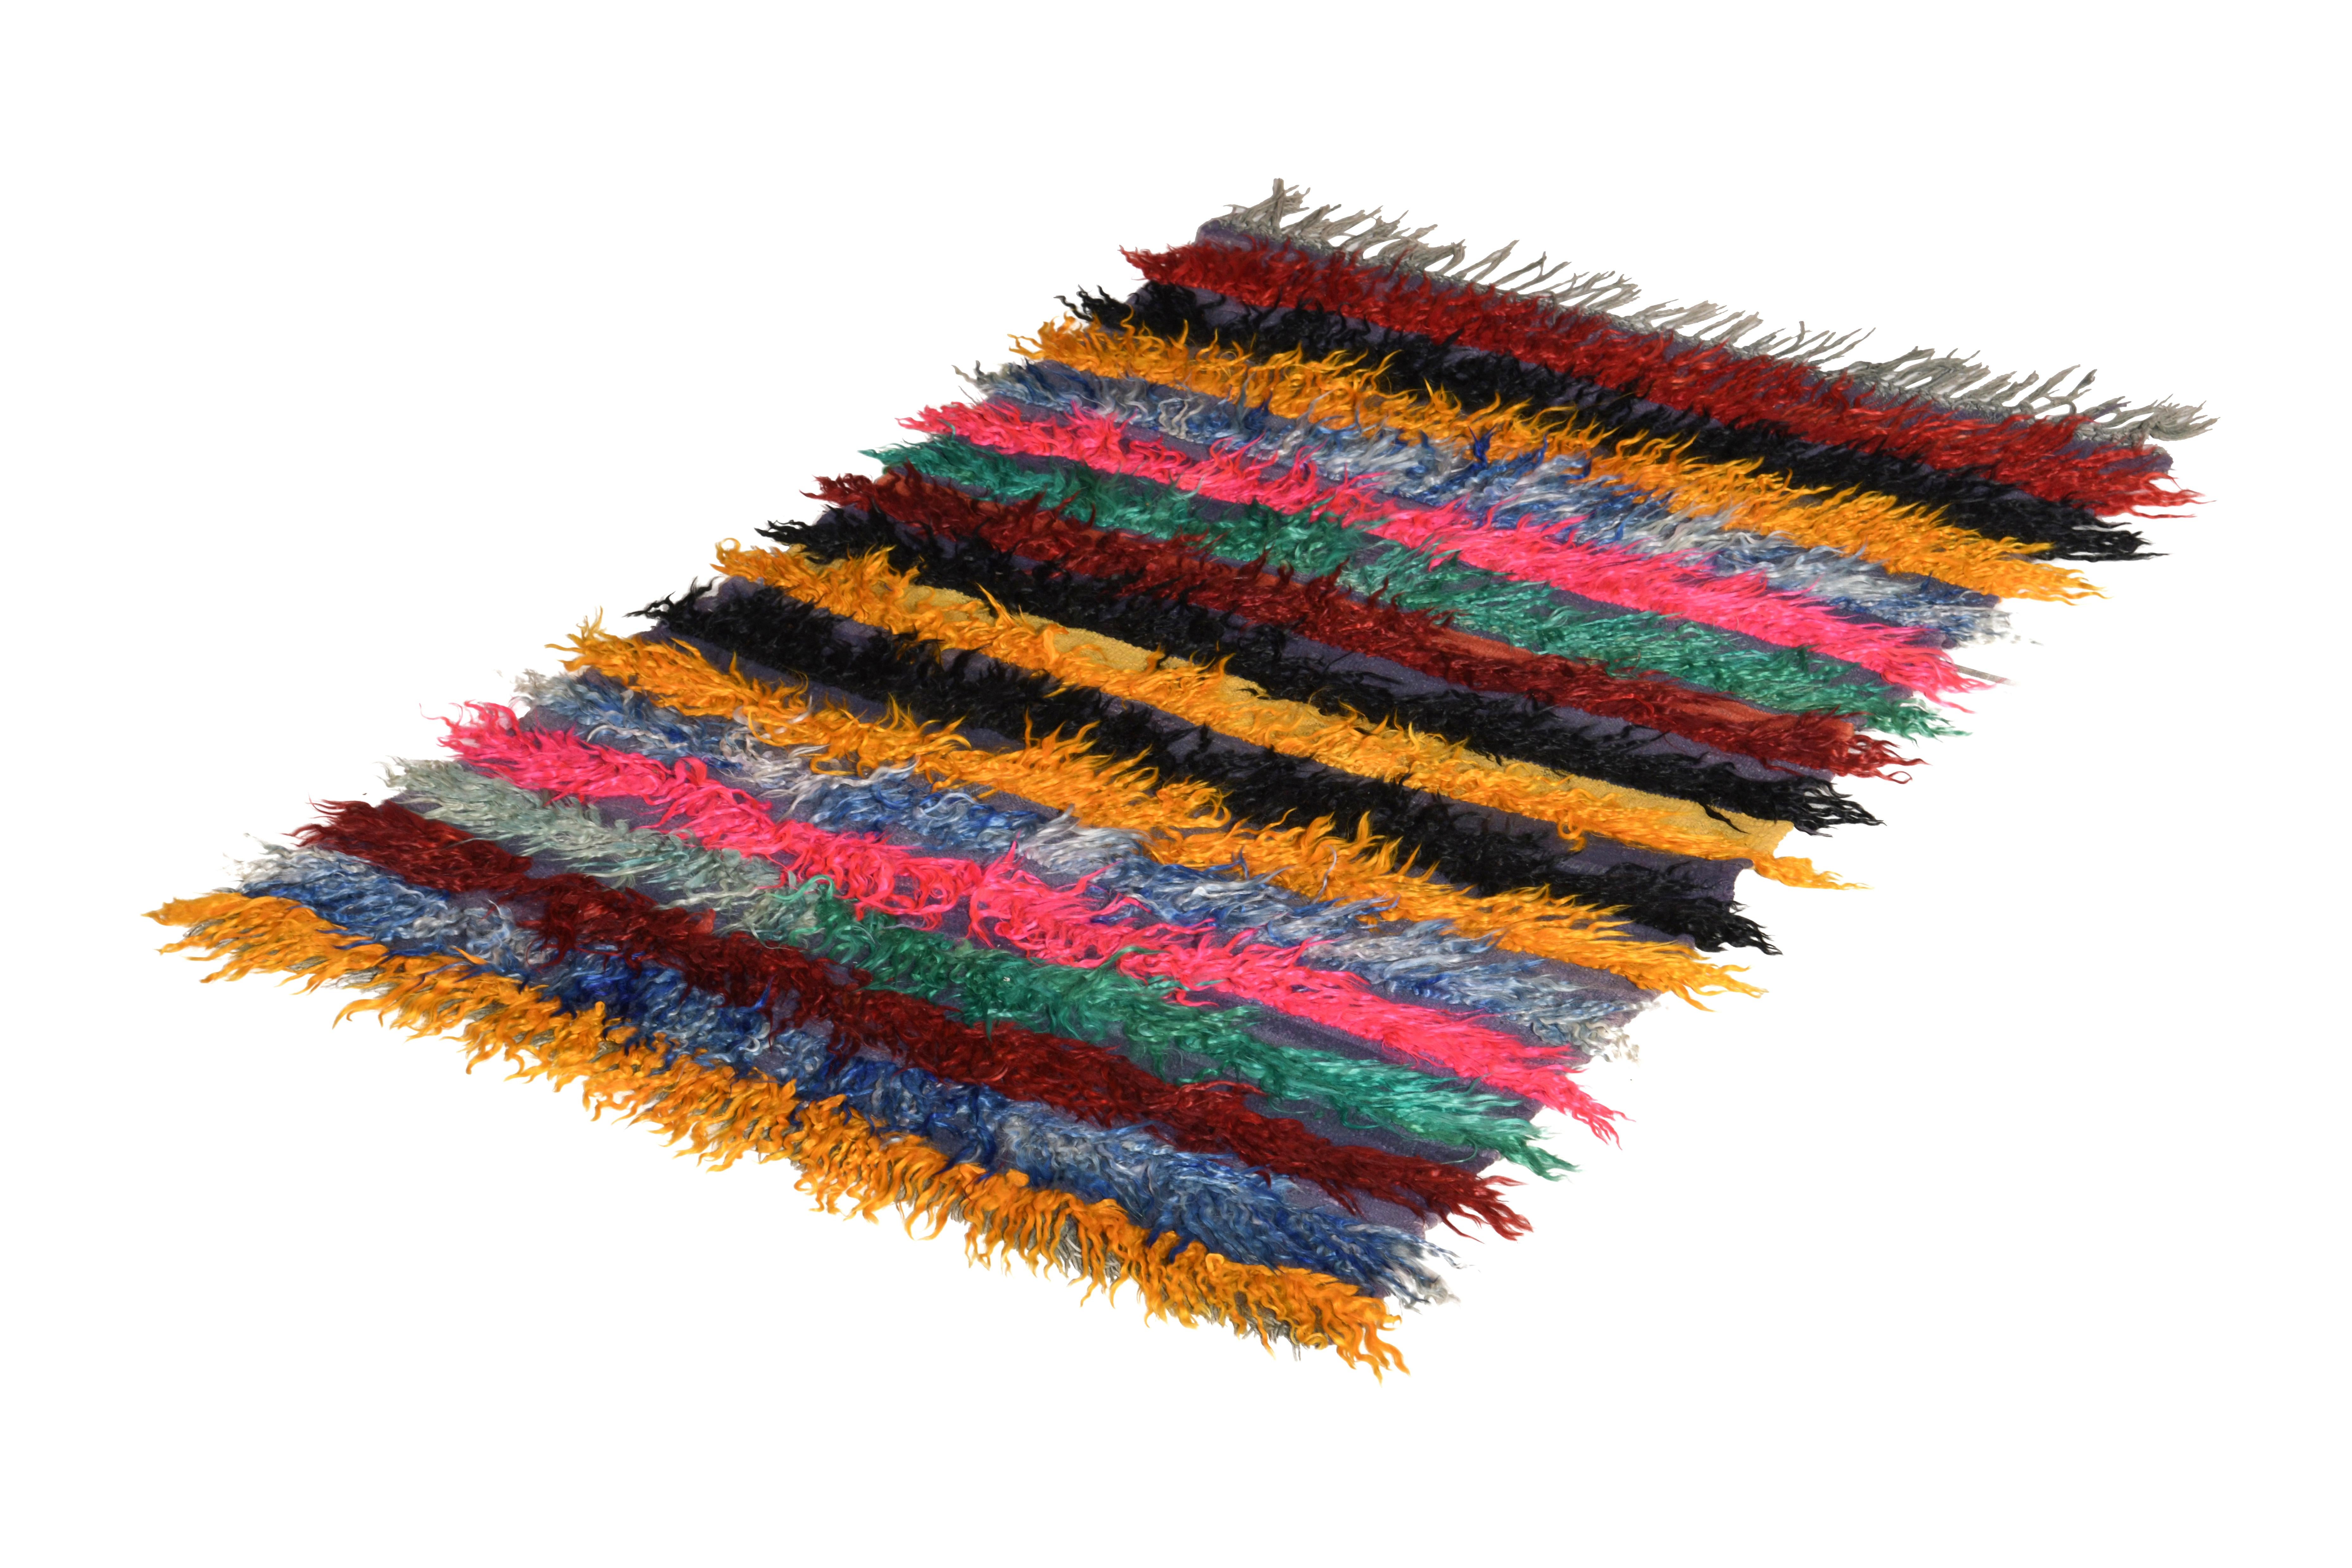 Hand knotted in wool originating from Turkey circa 1950-1960, this vintage rug hails from the midcentury Tulu rug family, known for lively, playful shag rug style and textural approaches like that of this multicolor high-low stripe pattern in 4 x 6.